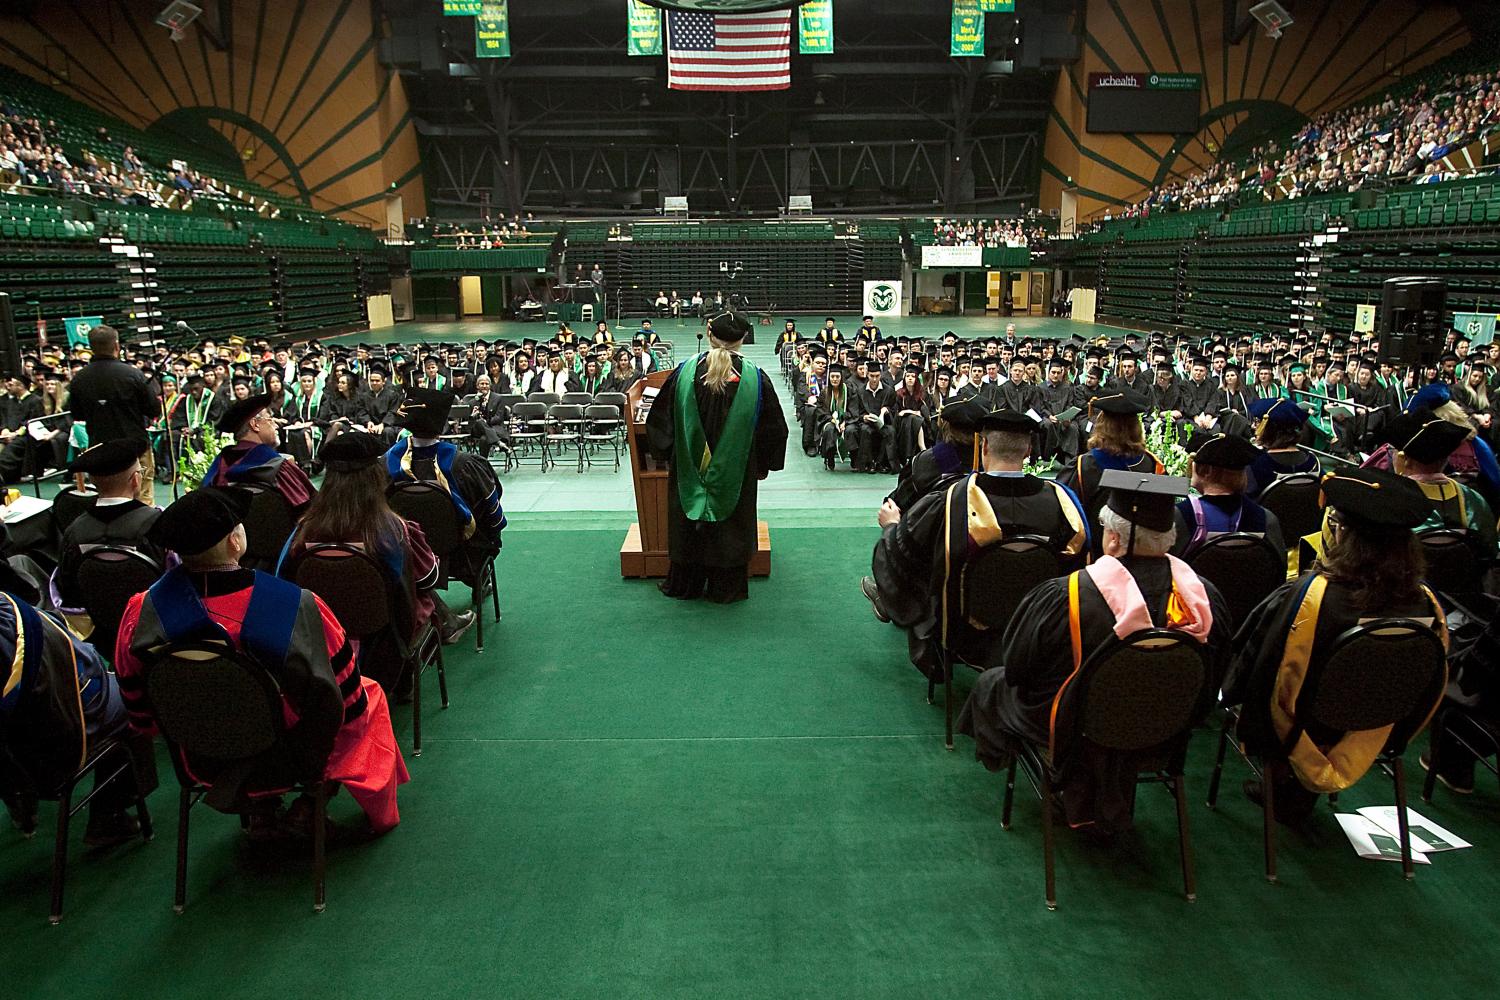 Professor Denise Apodaca, middle, gives the commencement address to graduates during the graduation ceremony for the College of Liberal Arts in Moby Arena at Colorado State University in Fort Collins, Colo. on Saturday, Dec. 21, 2019.Csu Liberalartsgraduation3